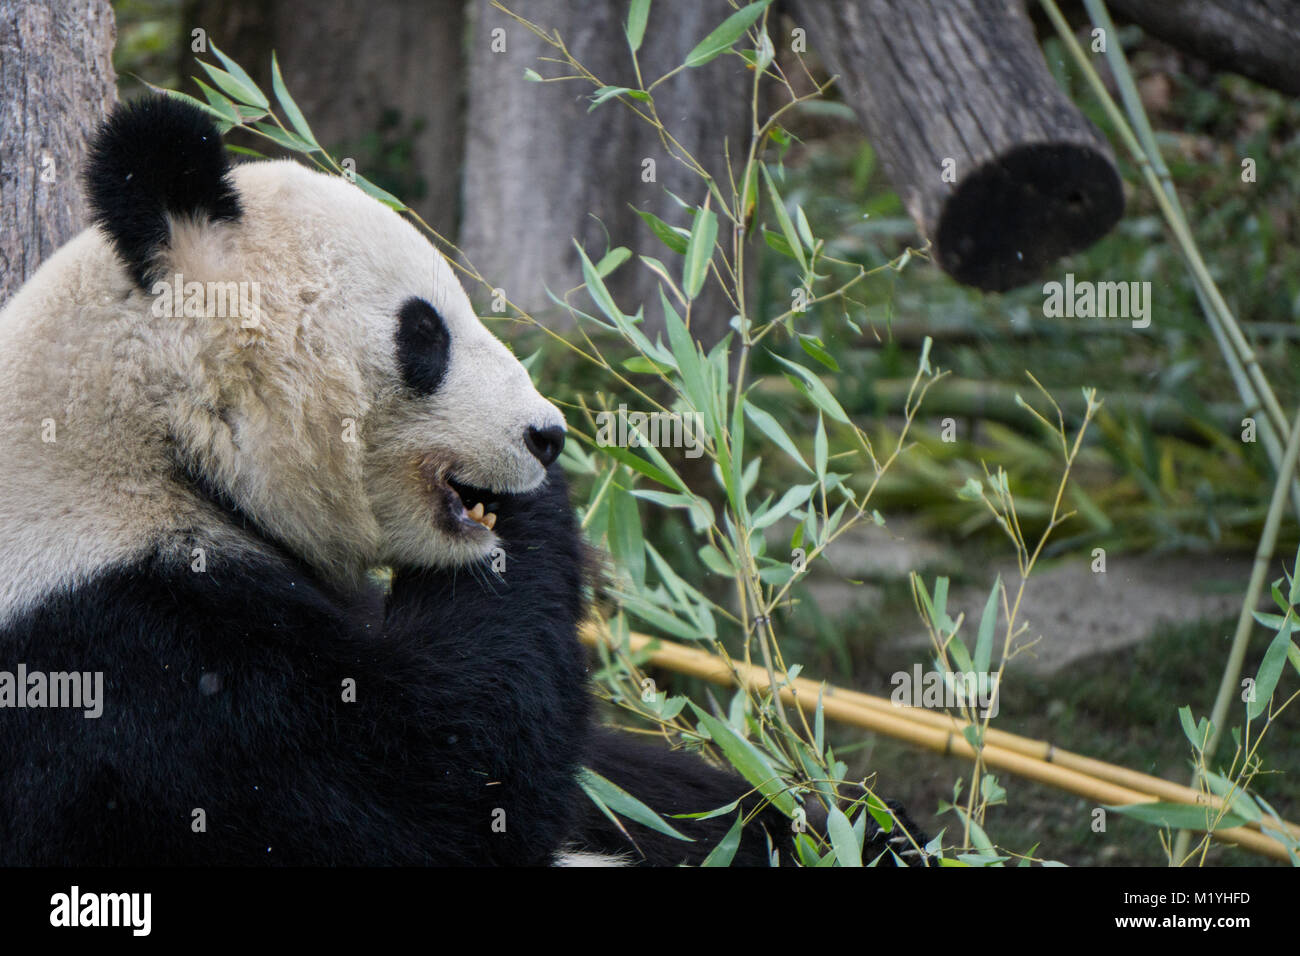 Panda taking a bite out of a bamboo branch Stock Photo